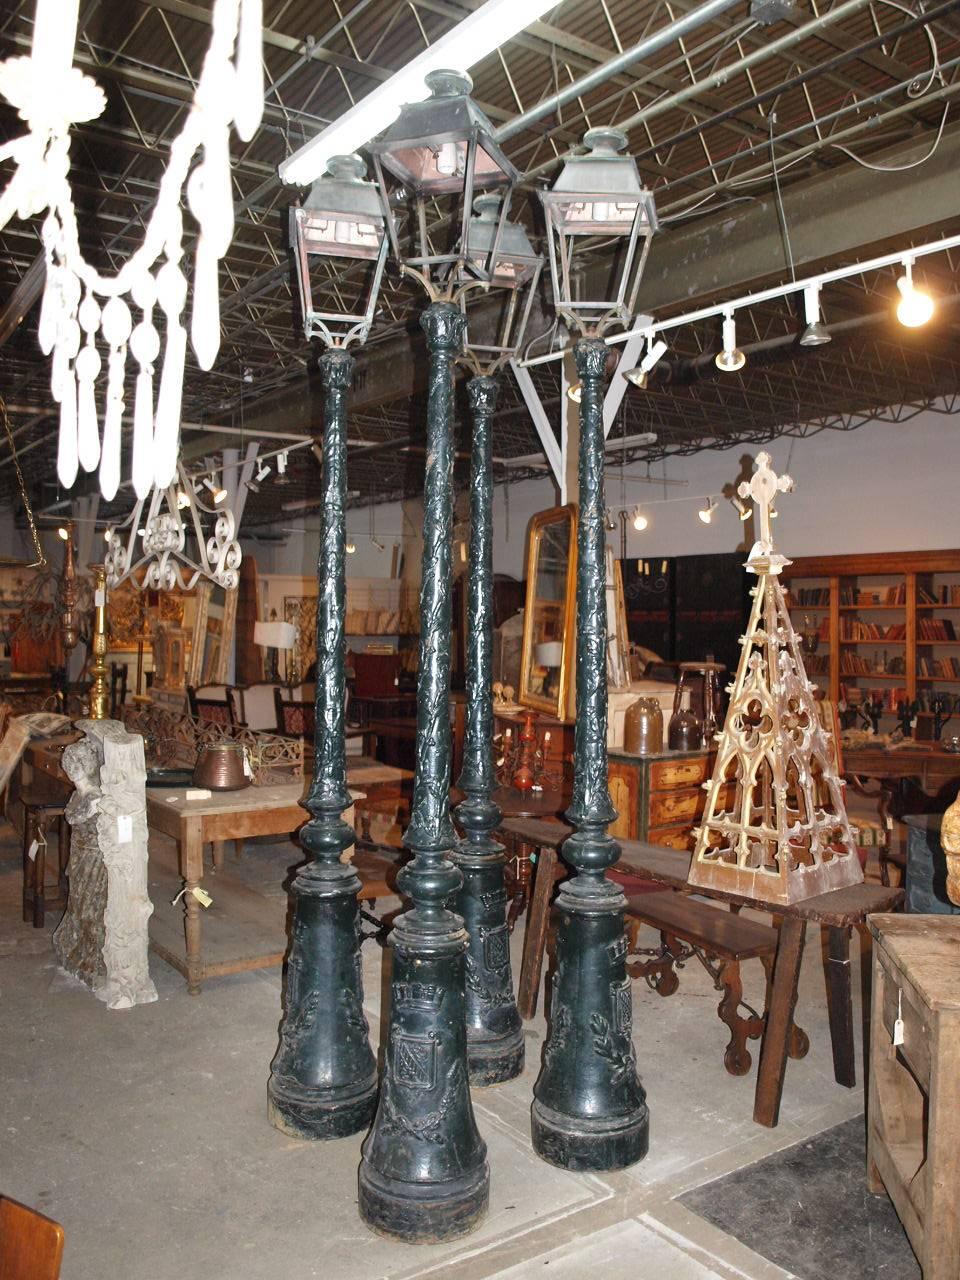 A tremendous set of four lamp posts / street lights from the Genoa area in Italy. Handsomely constructed in cast iron. The lanterns are in copper and bronze. The base of the post is decorated with a family crest and crown and the upper post is